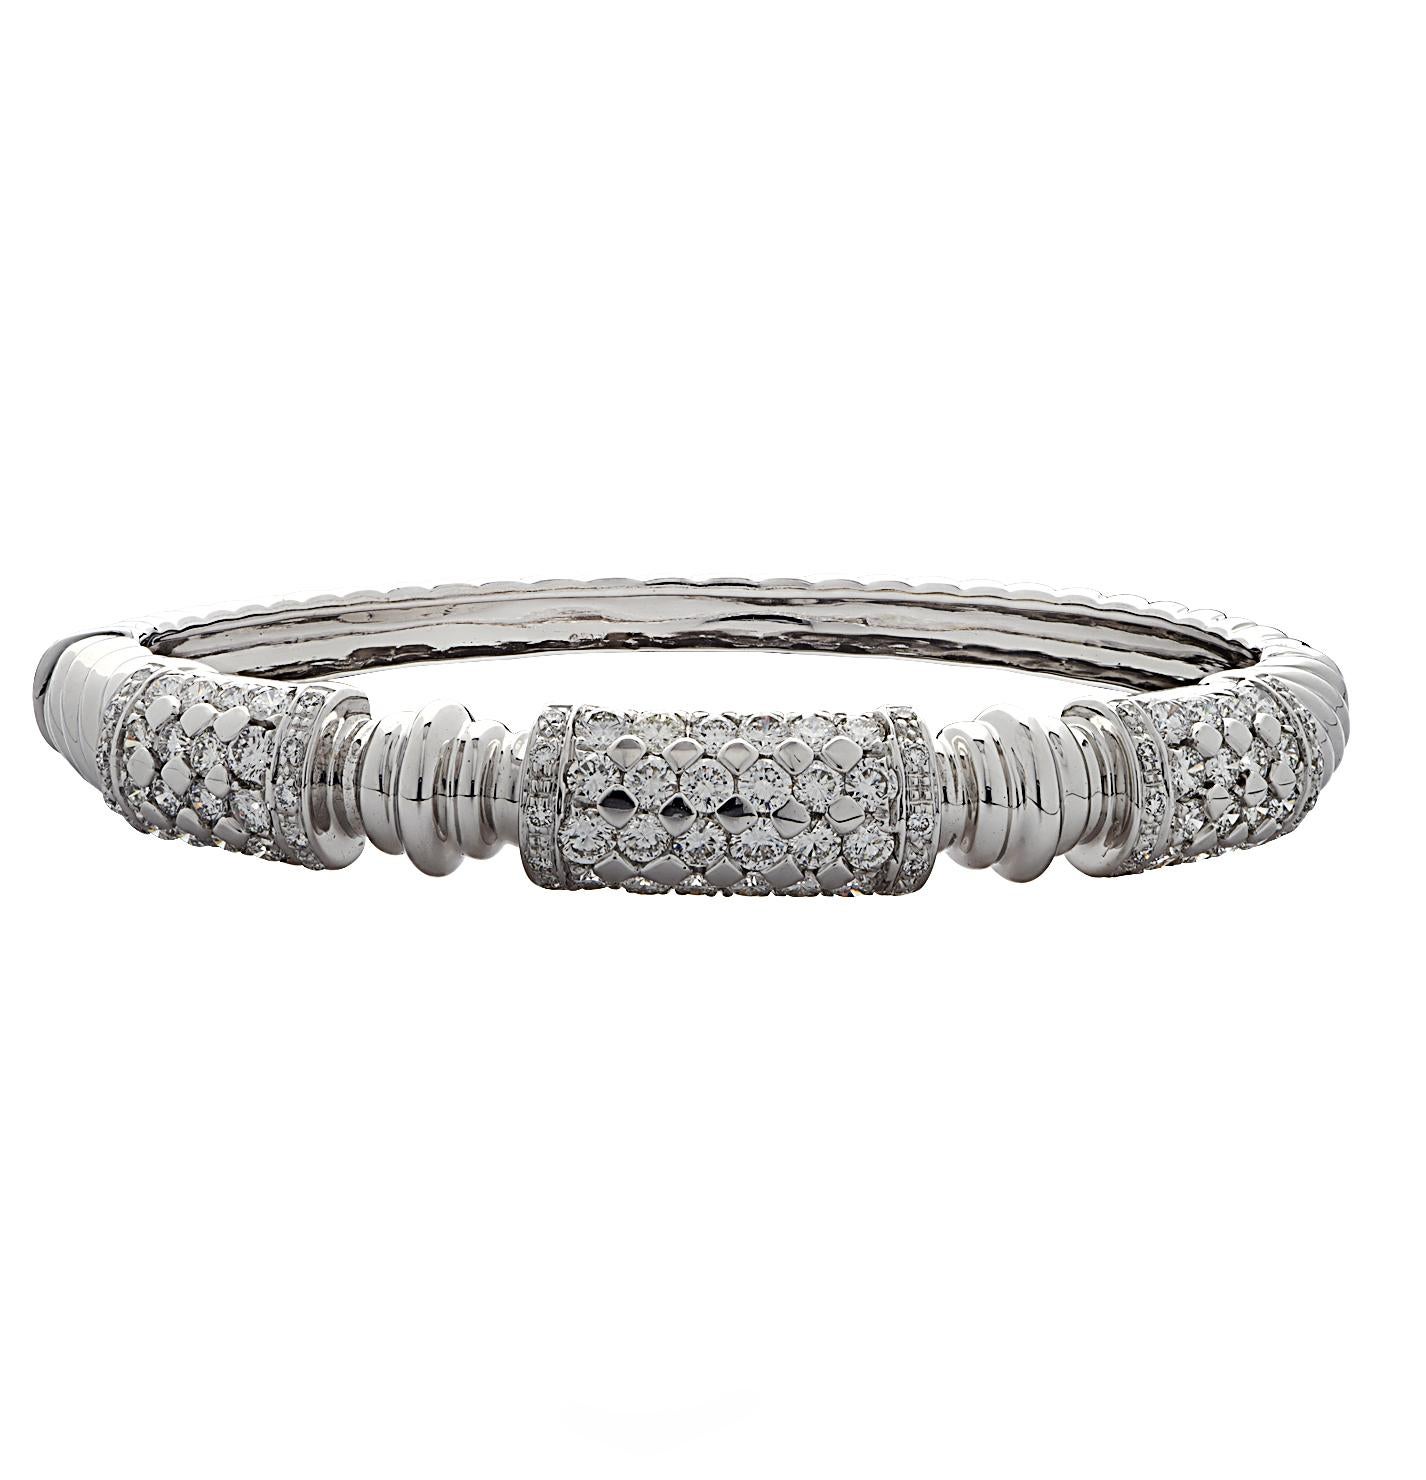 Striking diamond bangle bracelet set crafted in 18 Karat White Gold adorned with 172 round brilliant cut diamonds weighing approximately 7.3 carats total, F color, VS clarity. These stunning bracelets measure 2.2 inches x 1.9 inches and 9.4 mm at